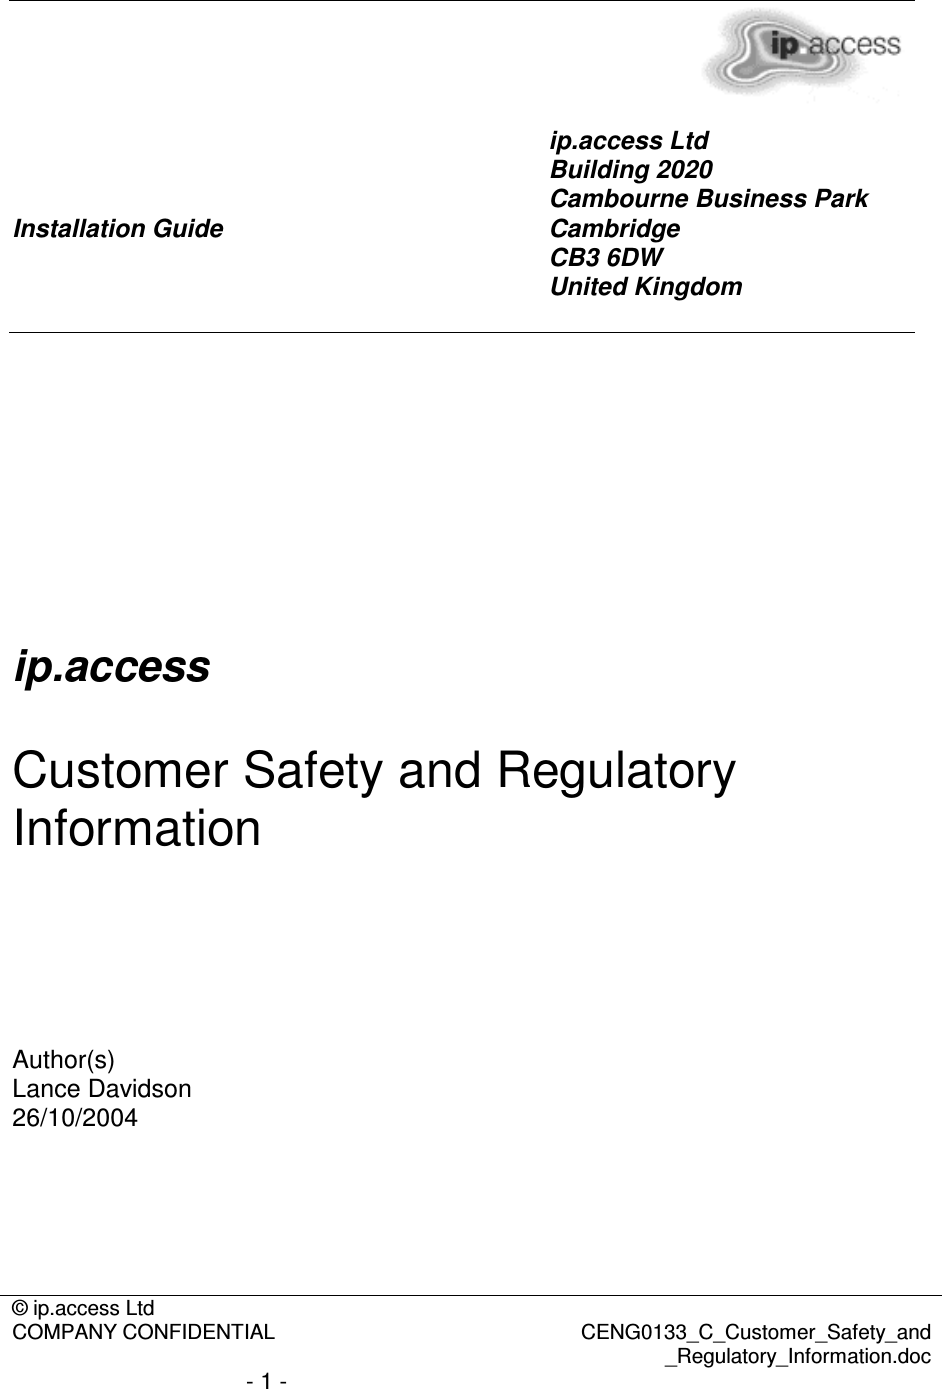 © ip.access Ltd  COMPANY CONFIDENTIAL  CENG0133_C_Customer_Safety_and _Regulatory_Information.doc - 1 -        Installation Guide ip.access Ltd Building 2020 Cambourne Business Park Cambridge CB3 6DW United Kingdom        ip.access  Customer Safety and Regulatory Information      Author(s) Lance Davidson 26/10/2004      